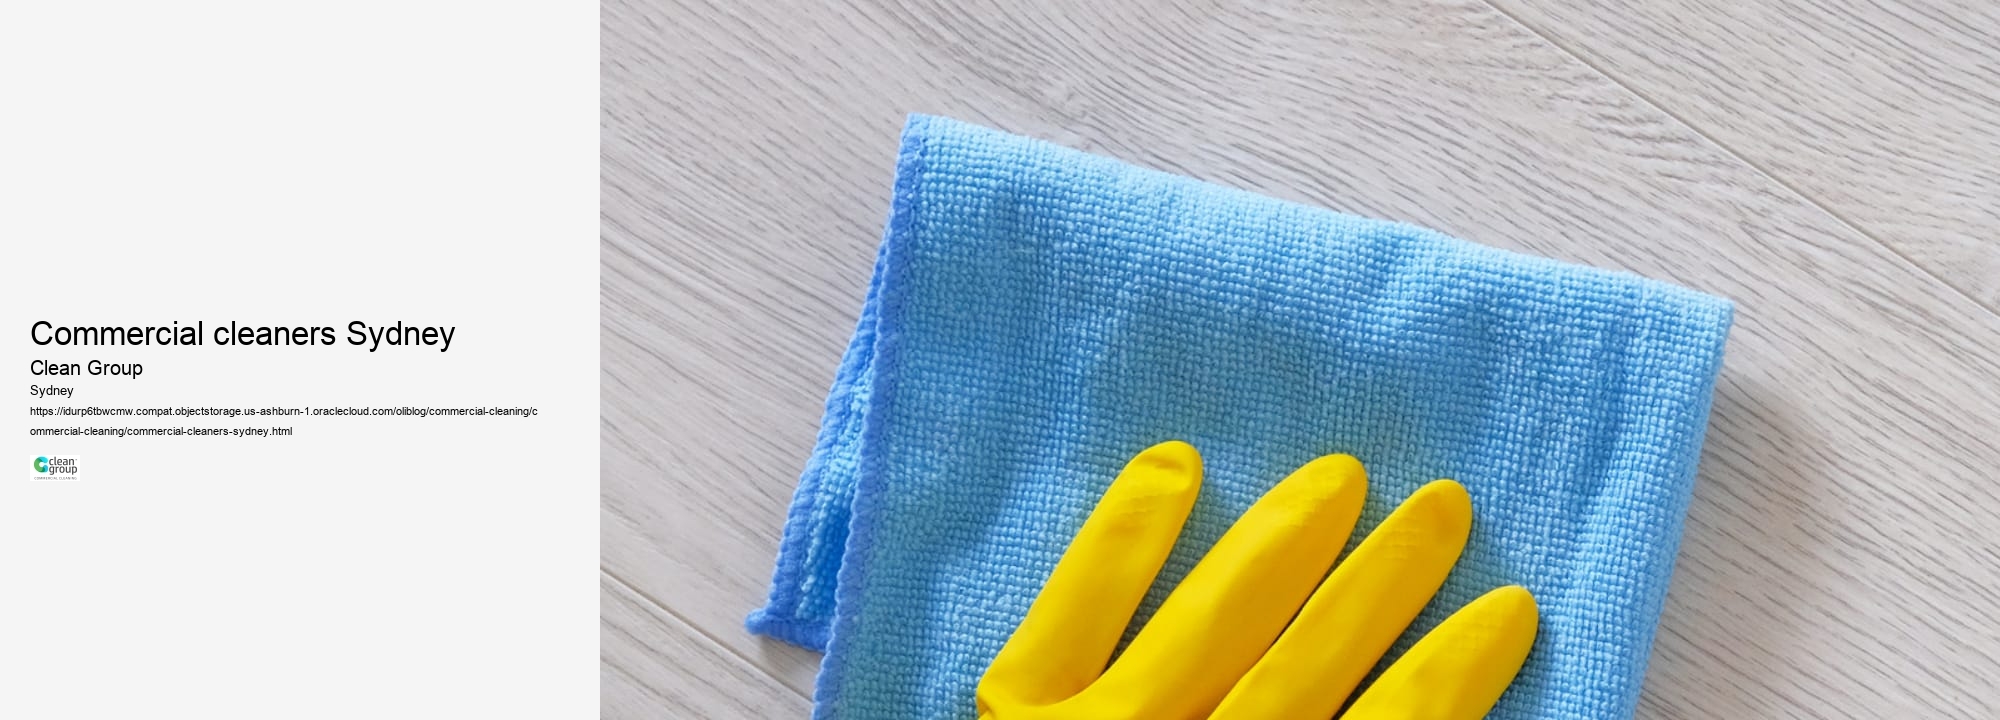 commercial cleaners Sydney